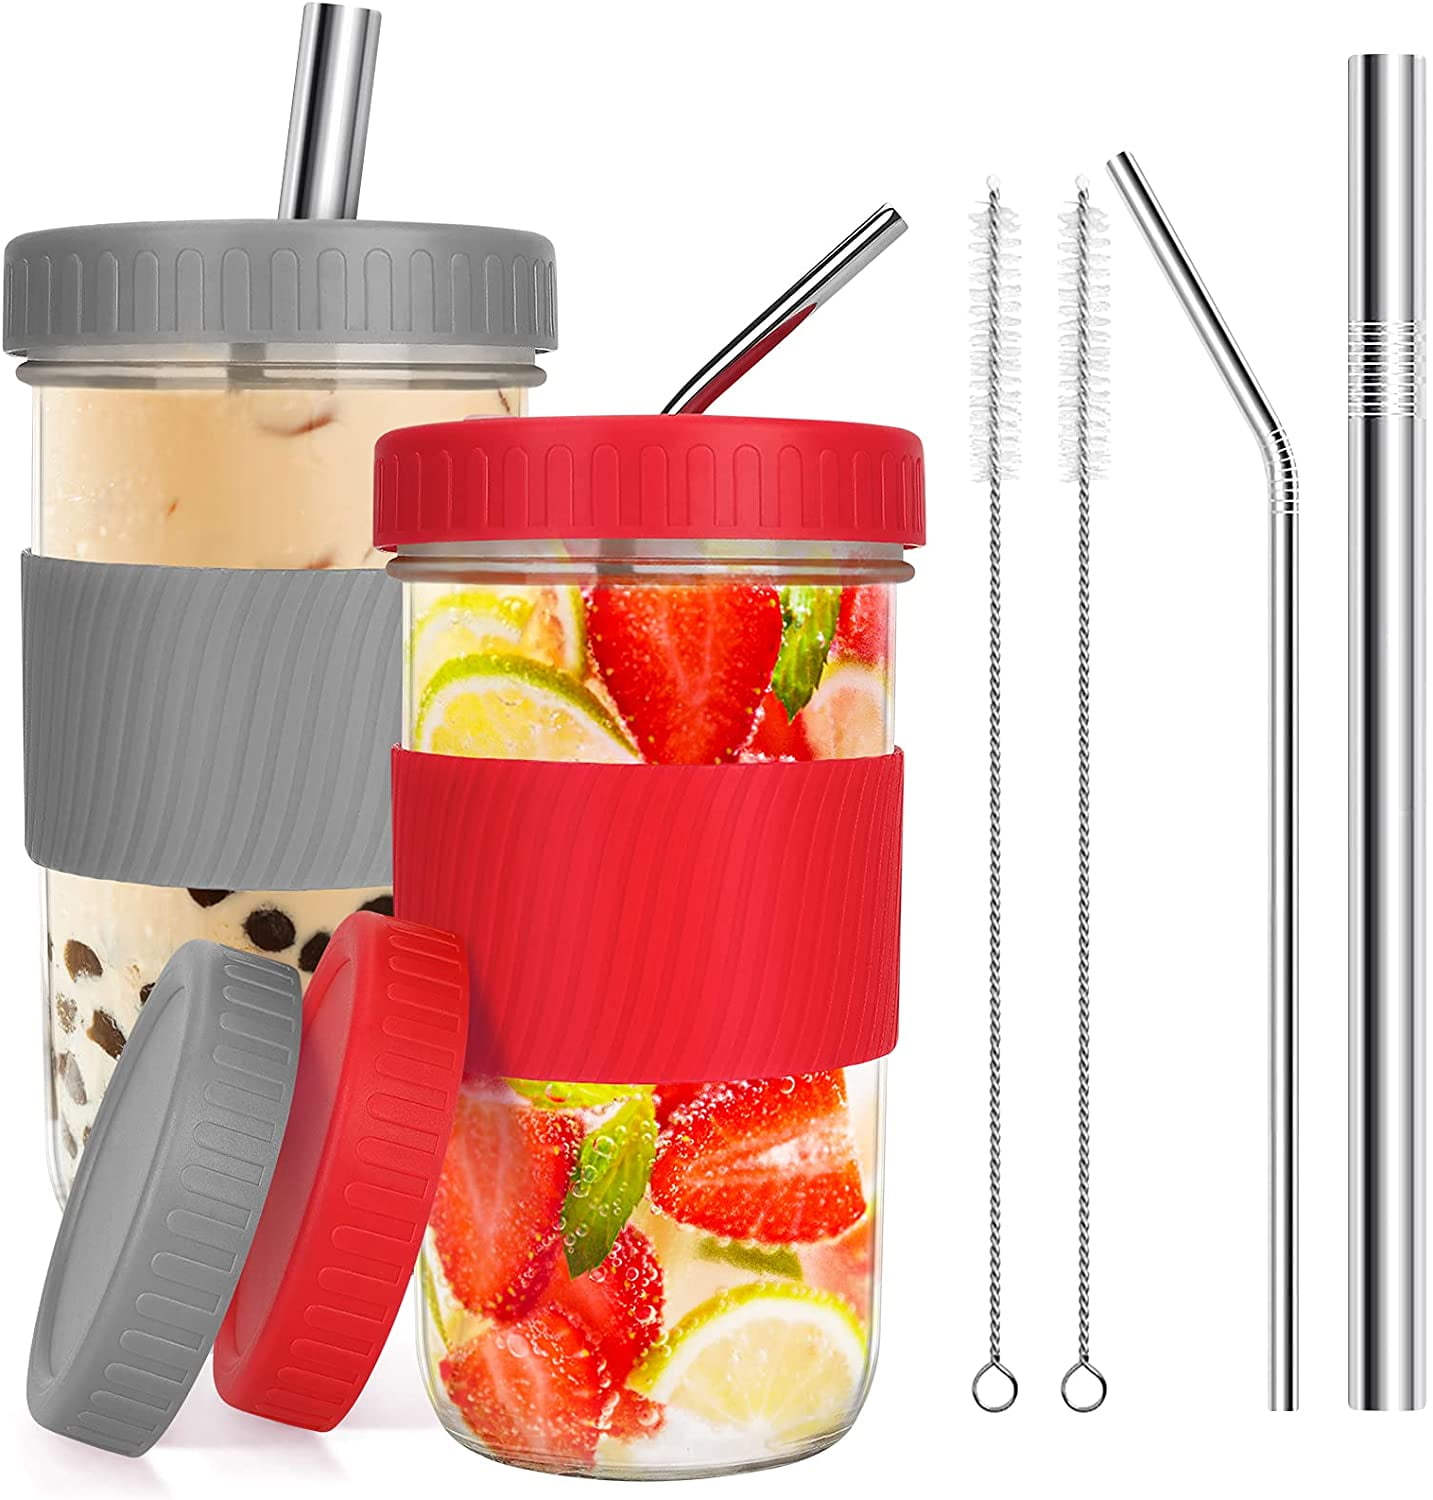 QKTYB Drinking Glasses Reusable Mason Jar Cups with 2 Lids and Straws Cleaning Brush Wide Mouth Bubble Tea Cup Travel Mug Glass Tumbler Mason Jar Sippy Cup for Boba Tea Smoothie Juices Jam Green